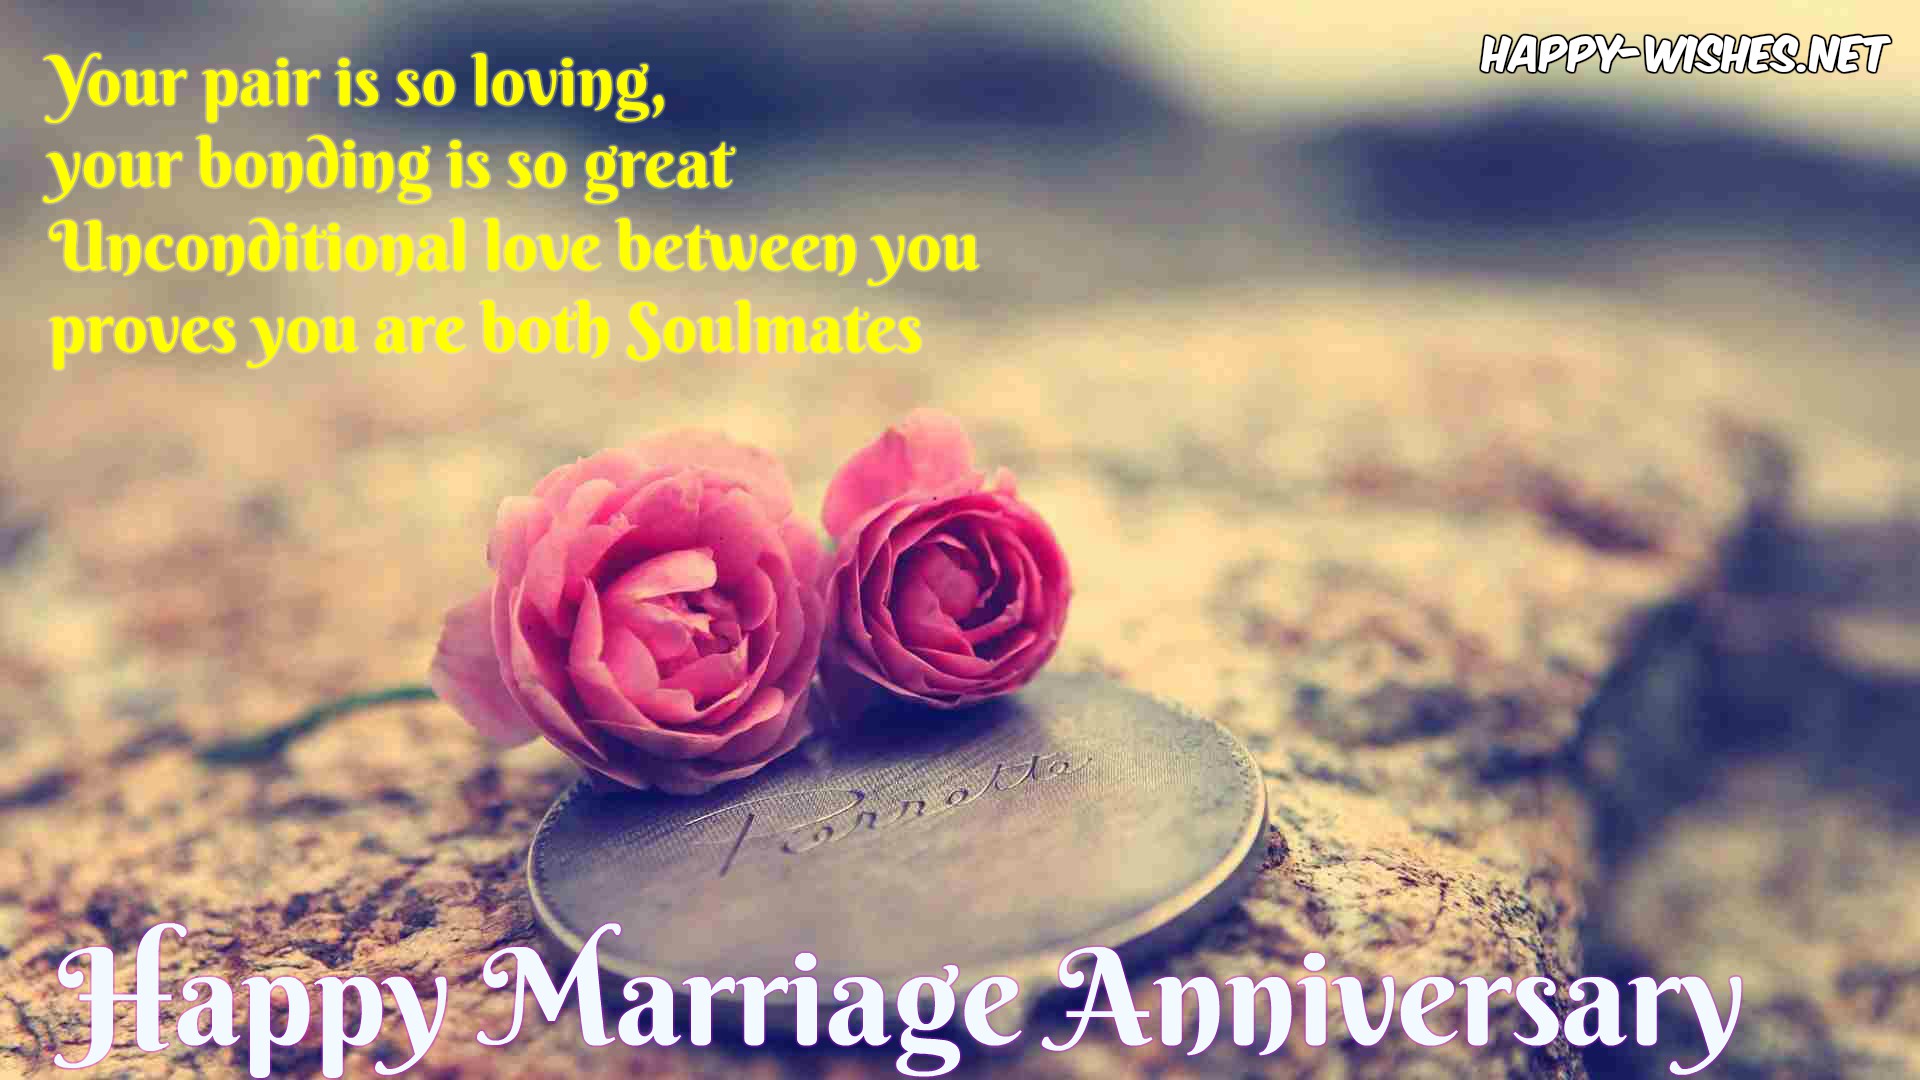 Happy Anniversary Messages for love